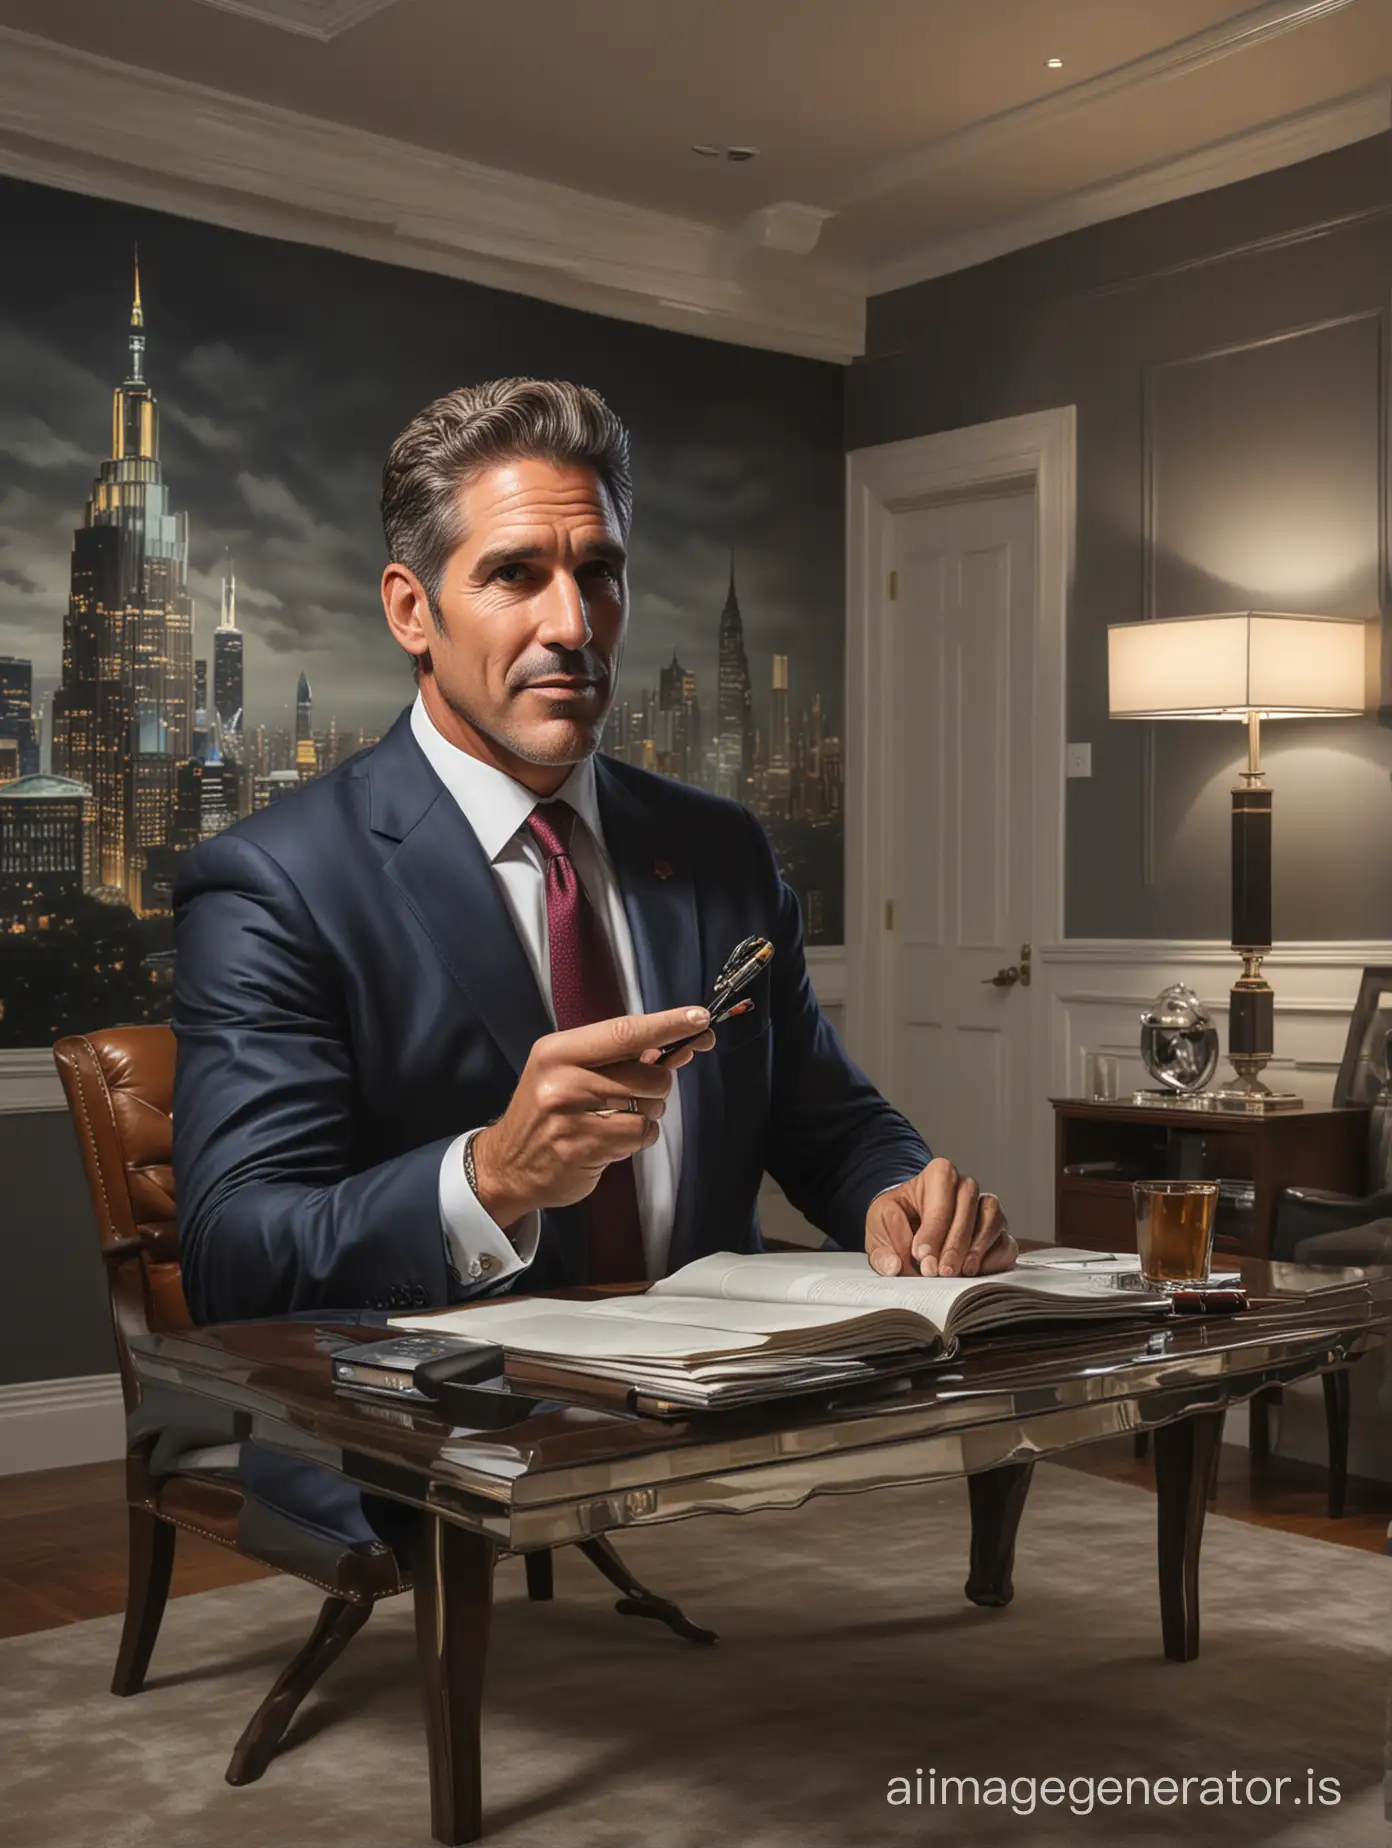 A highly realistic mural capturing Grant Cardone in an elegant, dimly lit study, in mid-conversation, with the ambiance of the room reflecting a sense of future possibilities, hyper realistic, ultra realistic details